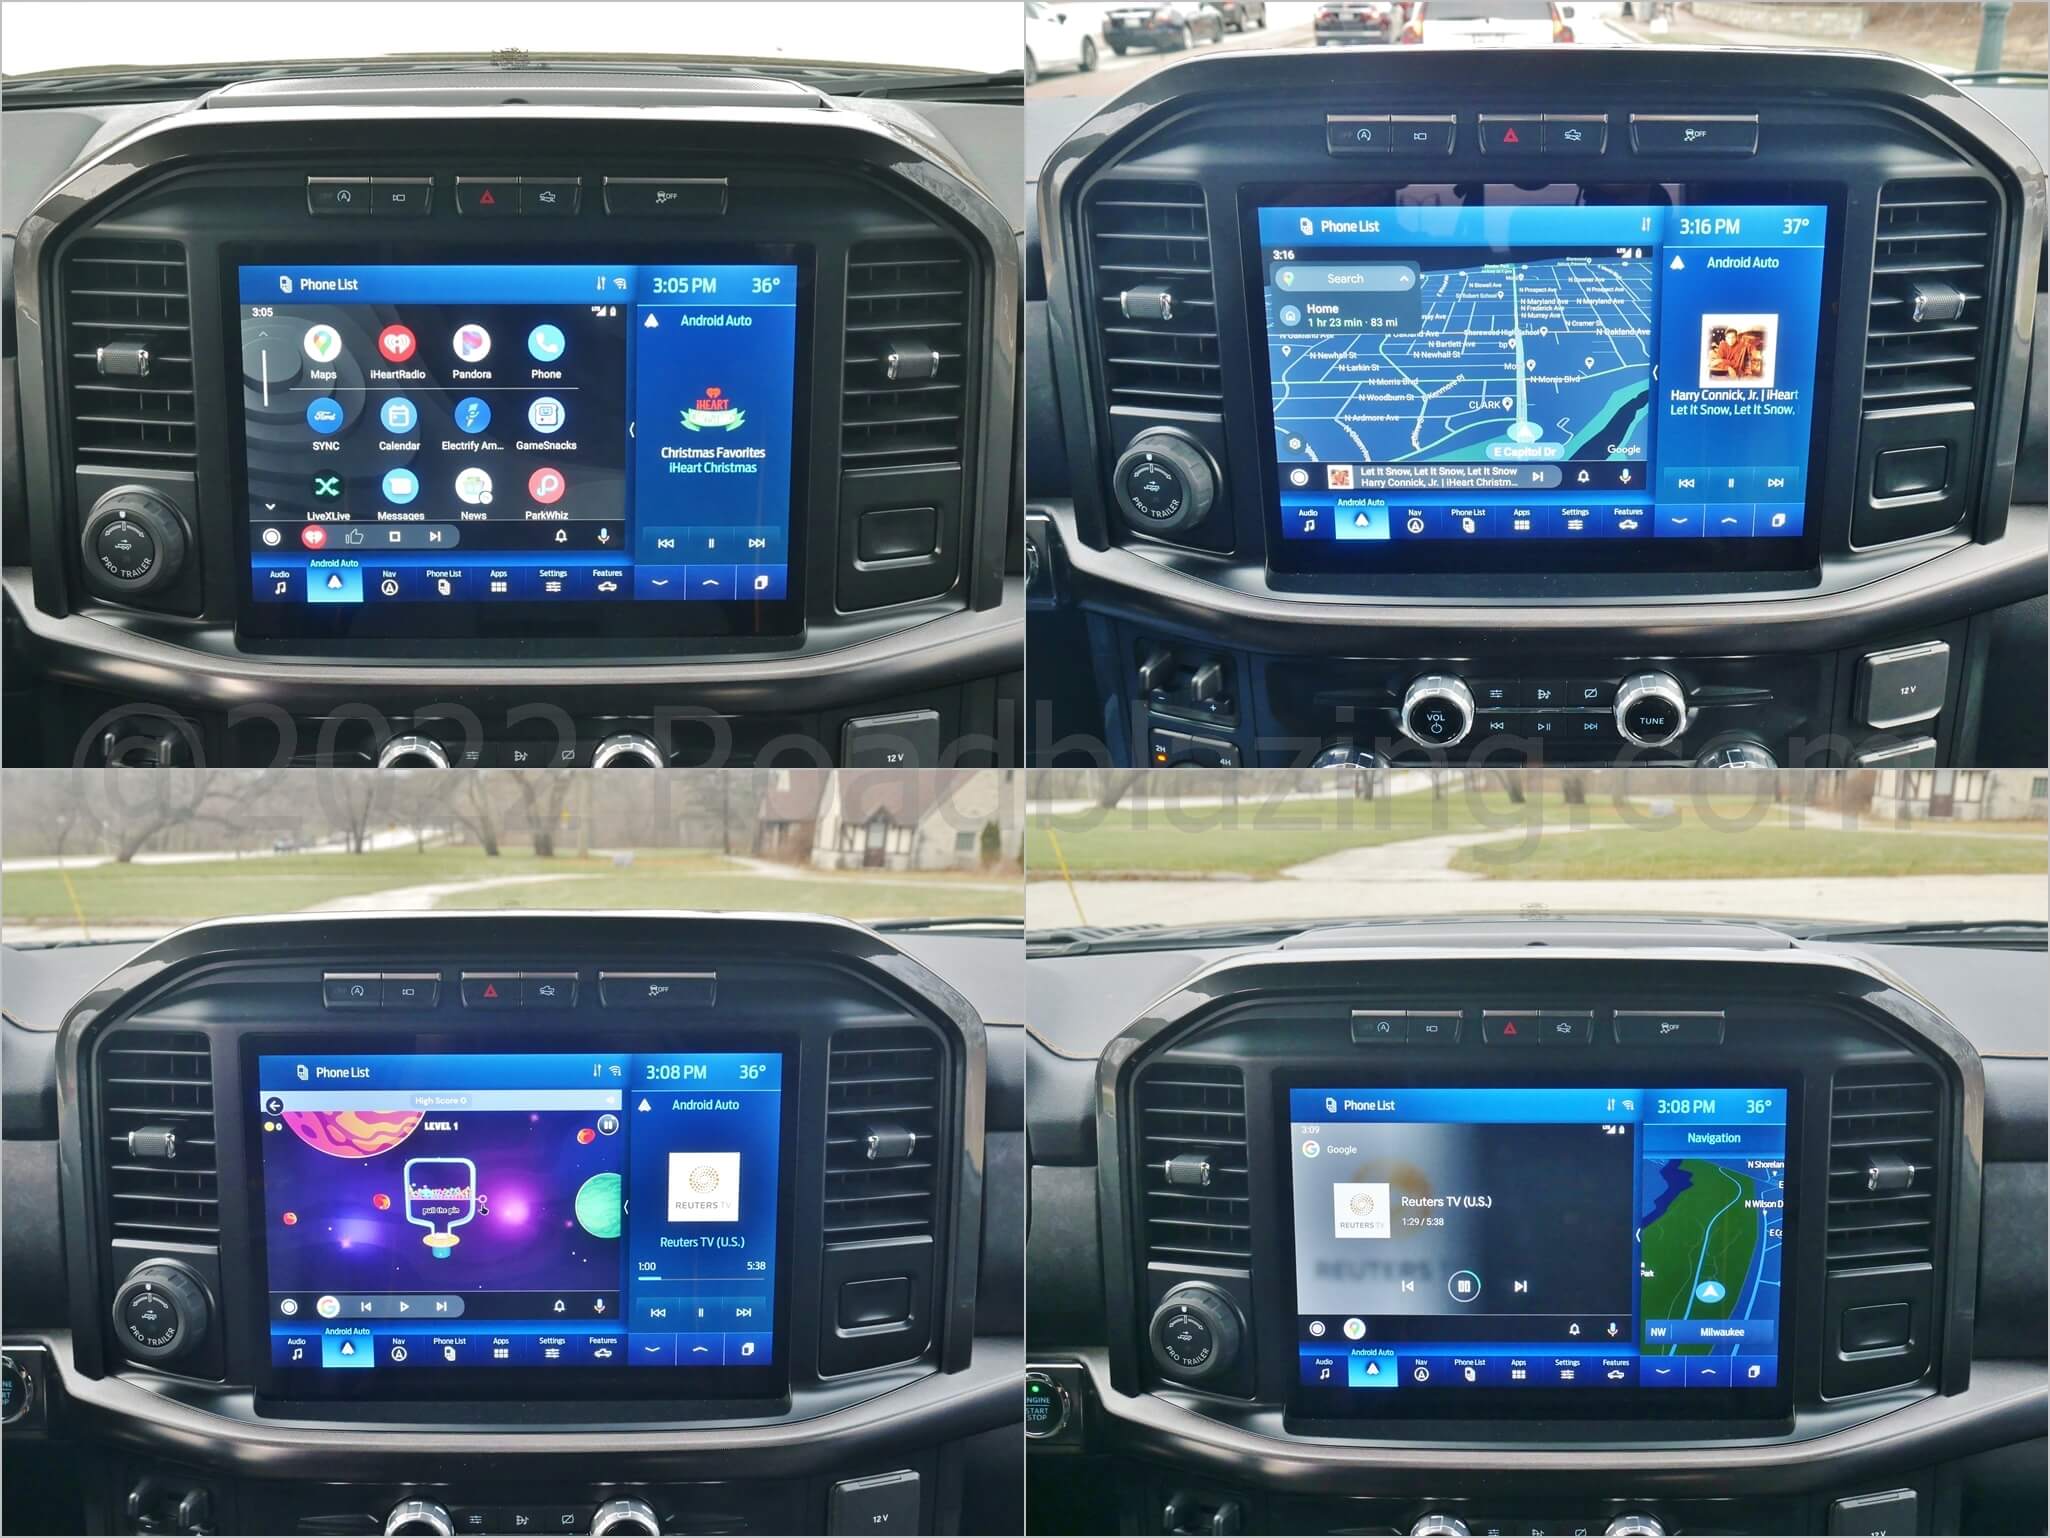 2021 Ford F-150 SuperCrew Tremor 4x4: Android Auto (& Apple CarPlay) wired phone projection